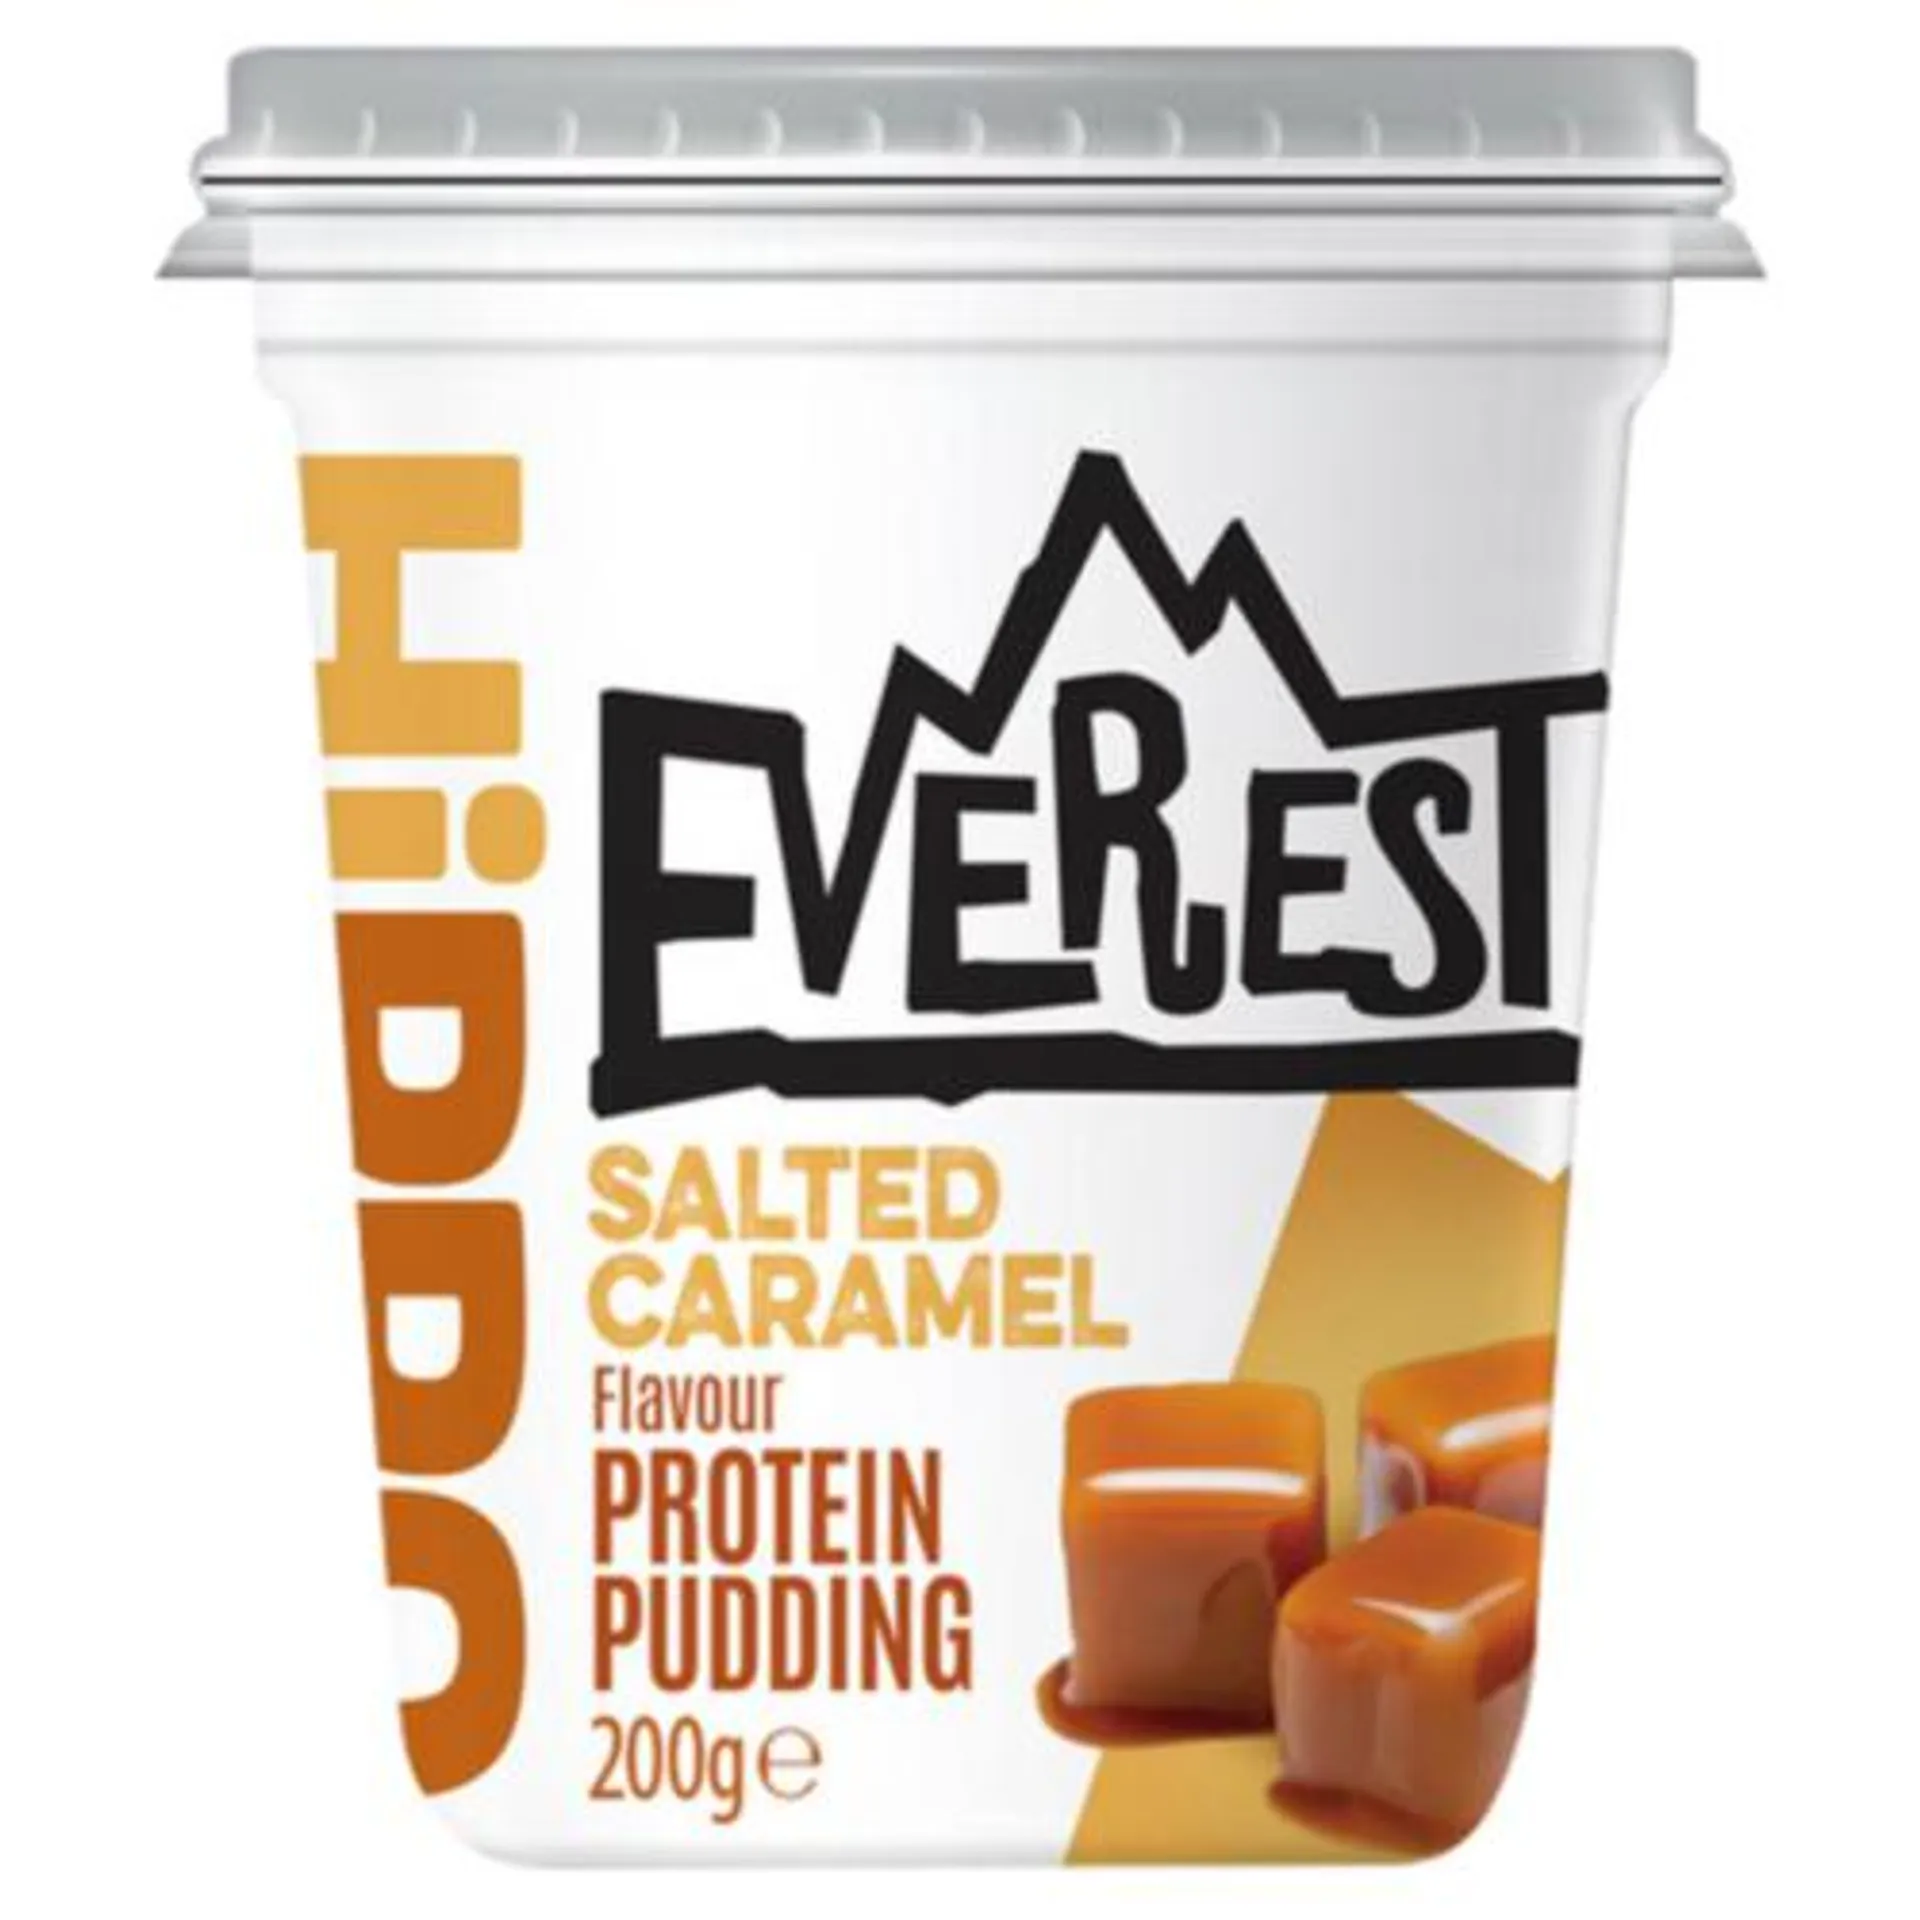 Everest Salted Caramel Protein Pudding